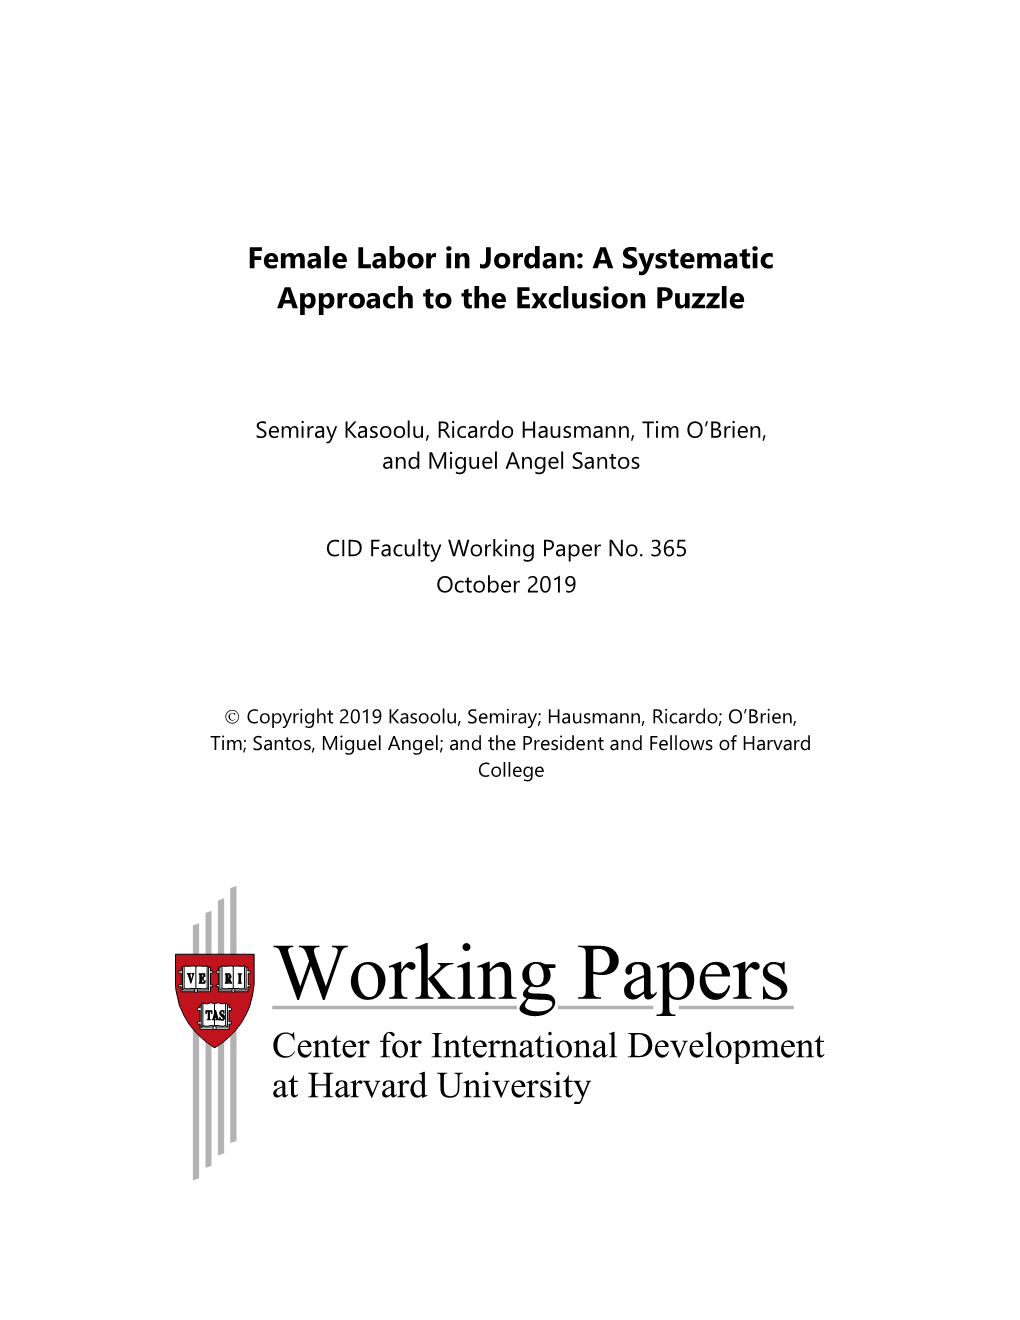 Female Labor in Jordan: a Systematic Approach to the Exclusion Puzzle